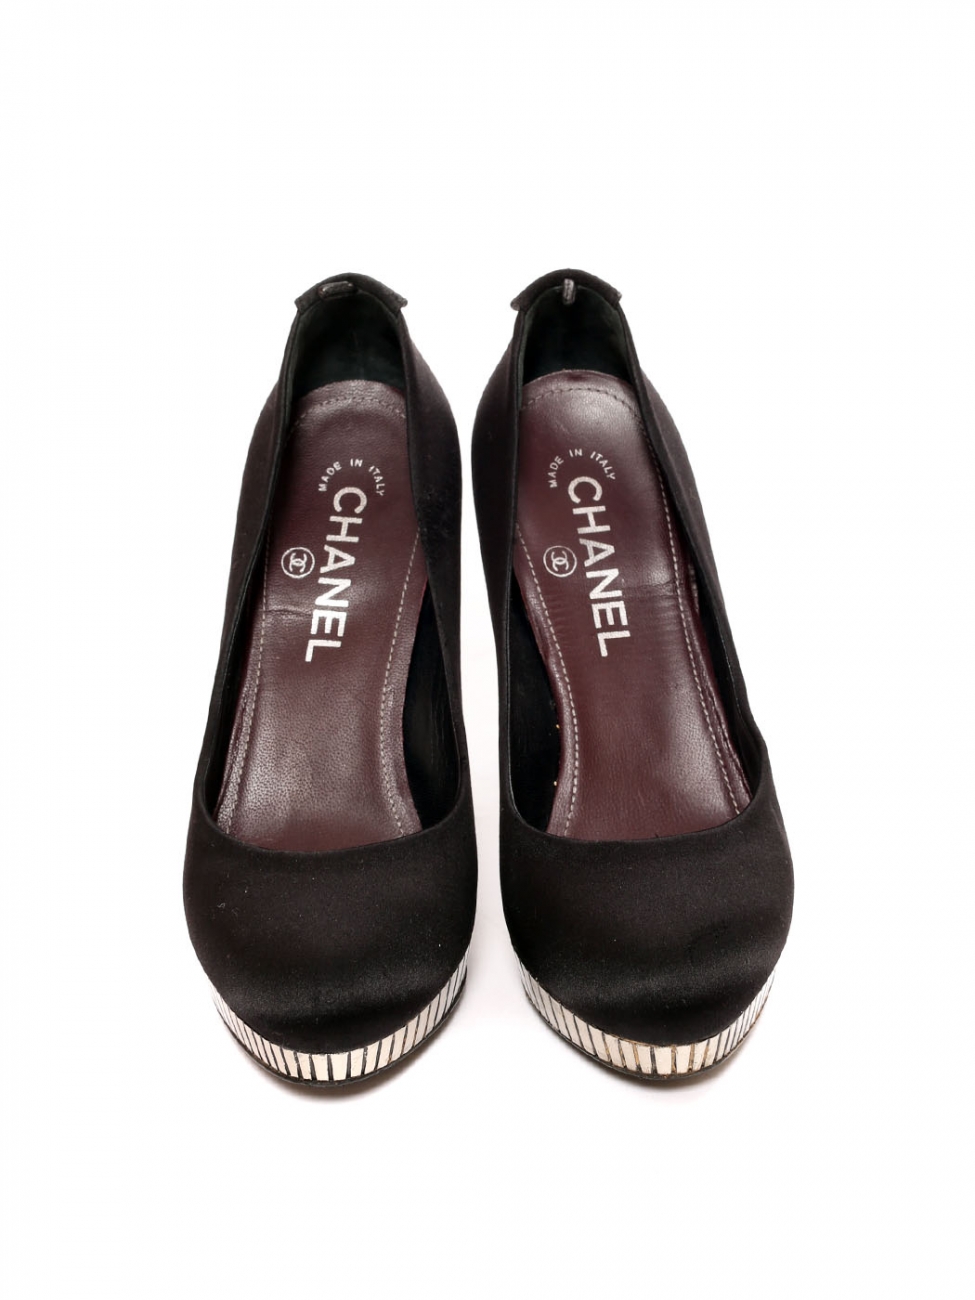 CHANEL, Shoes, Chanel Ballerina Heels Size 37 2 Made In Italy